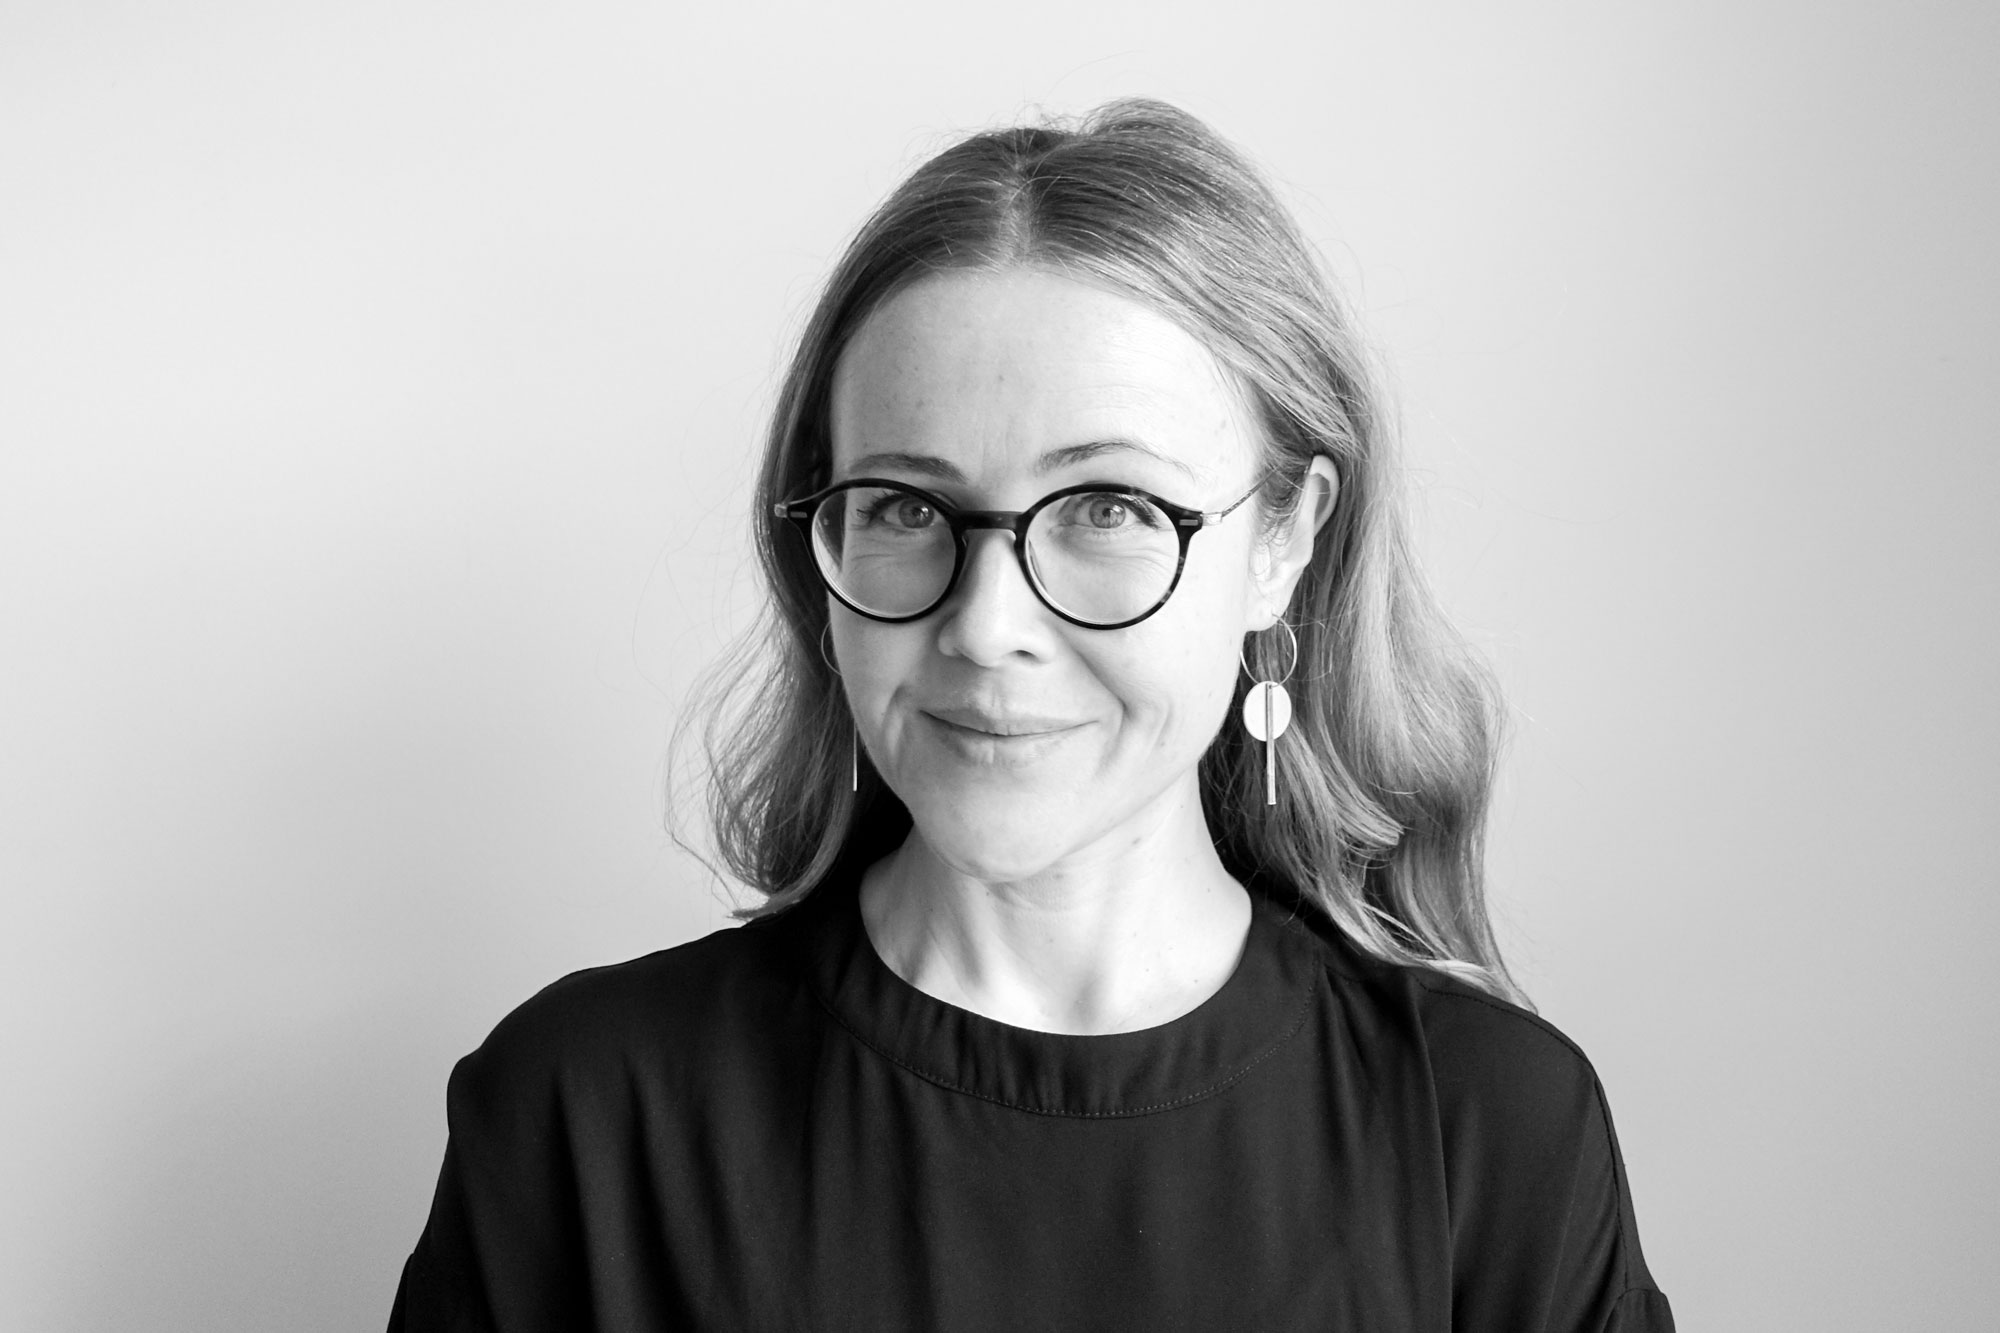 A black and white photo of a person with long light-coloured hair, light skin and eyes. They are wearing round glasses with a thin dark frame, dangling earrings in geometric shapes, and a dark-coloured shirt. They're smiling at the camera person and sitting in front of a light-coloured wall.